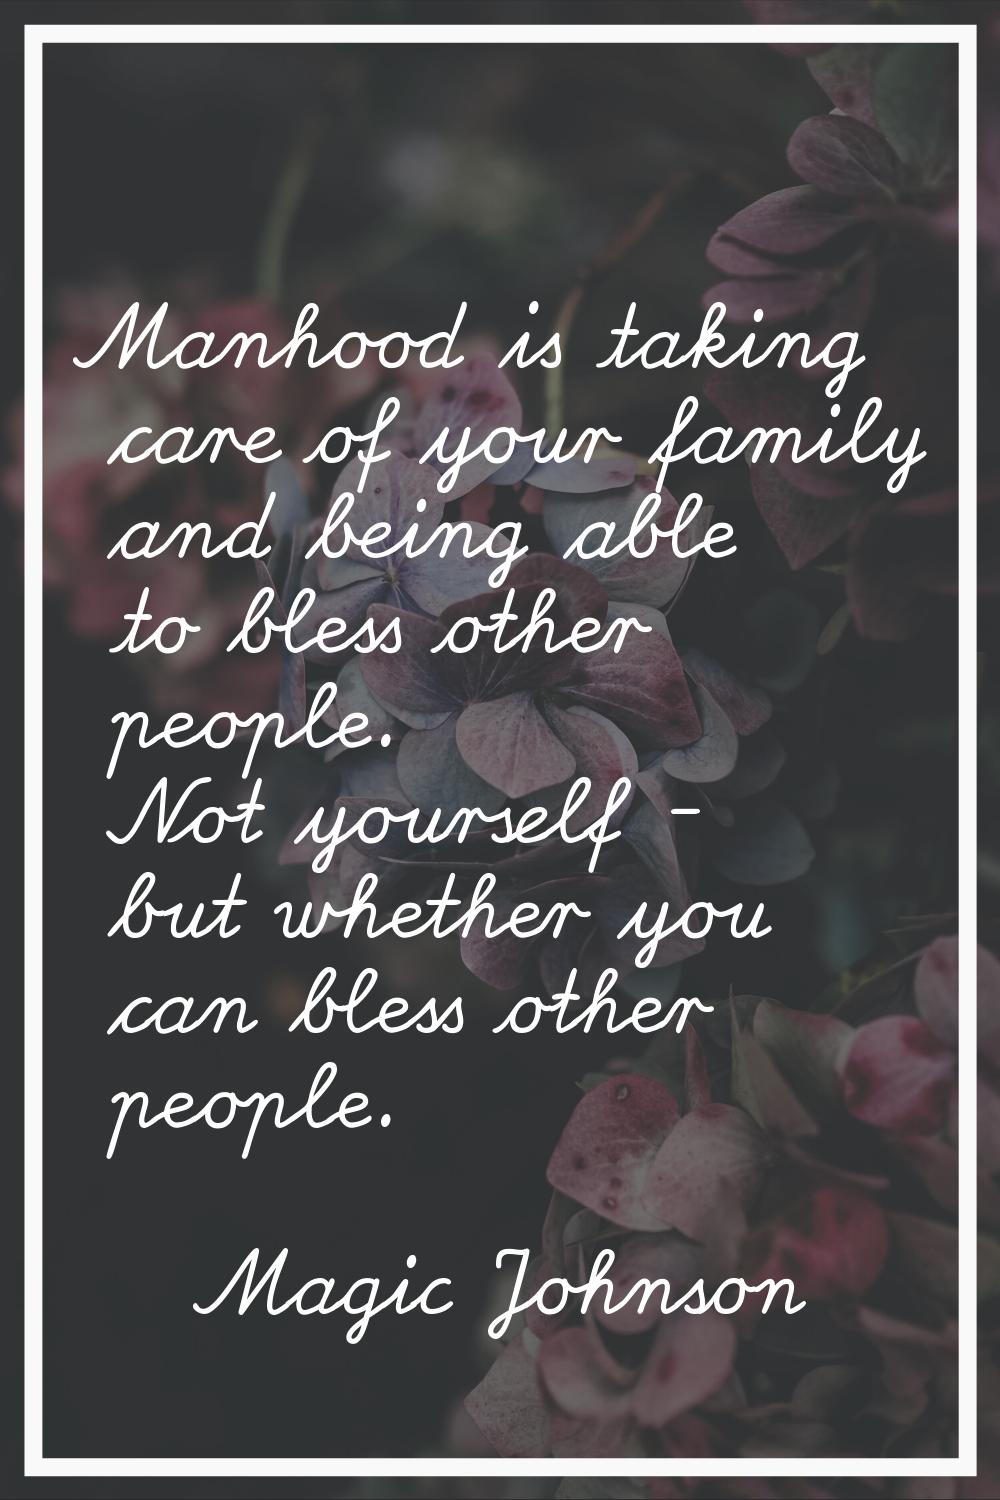 Manhood is taking care of your family and being able to bless other people. Not yourself - but whet